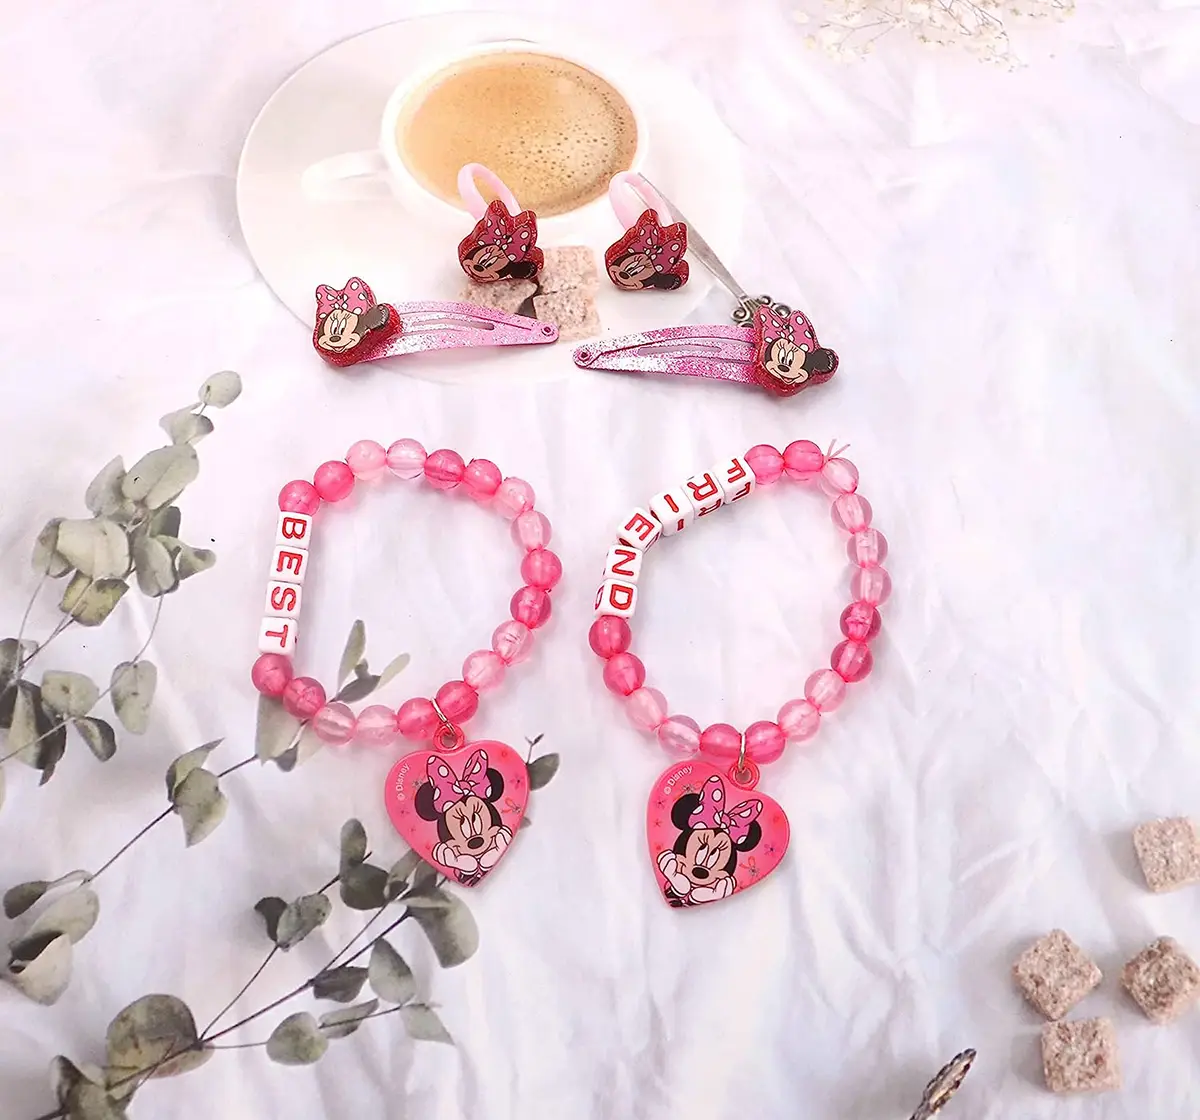 Li'l Diva Minnie Mouse Hair Accessories Pack of 6 Pink For Girls of Age 3Y+, Multicolour